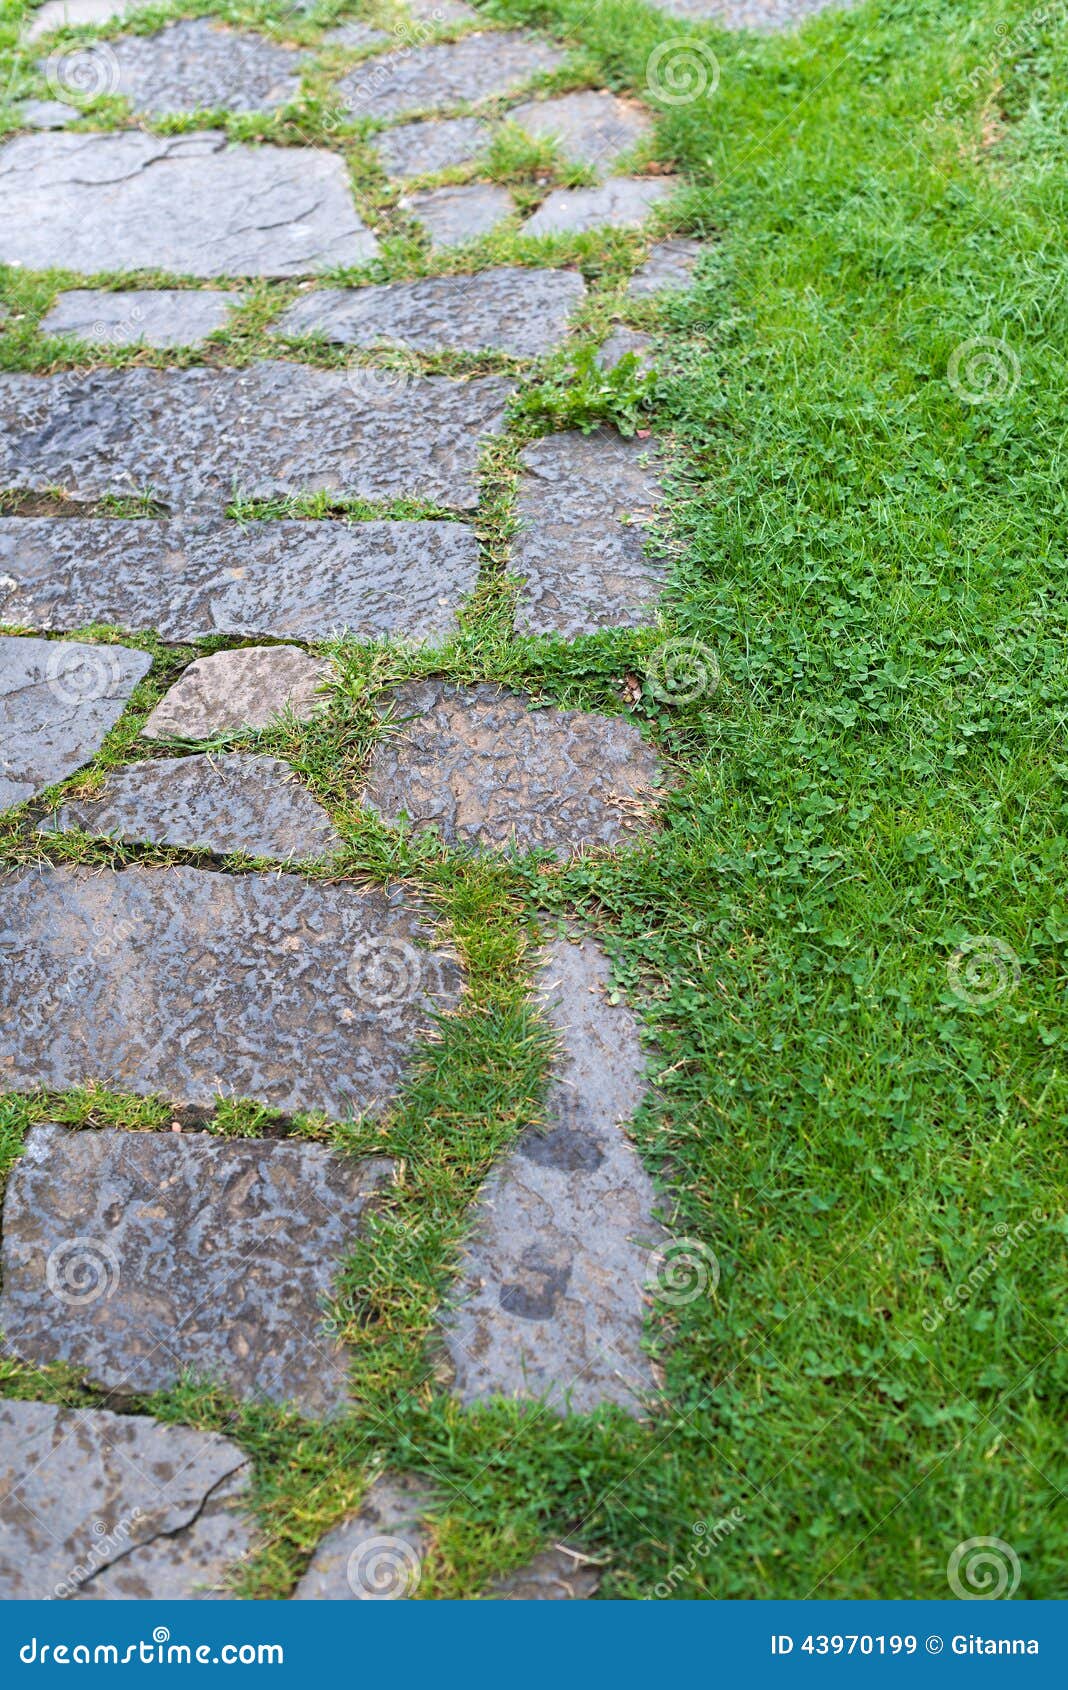 Paved garden. Detail of a garden with stone floor